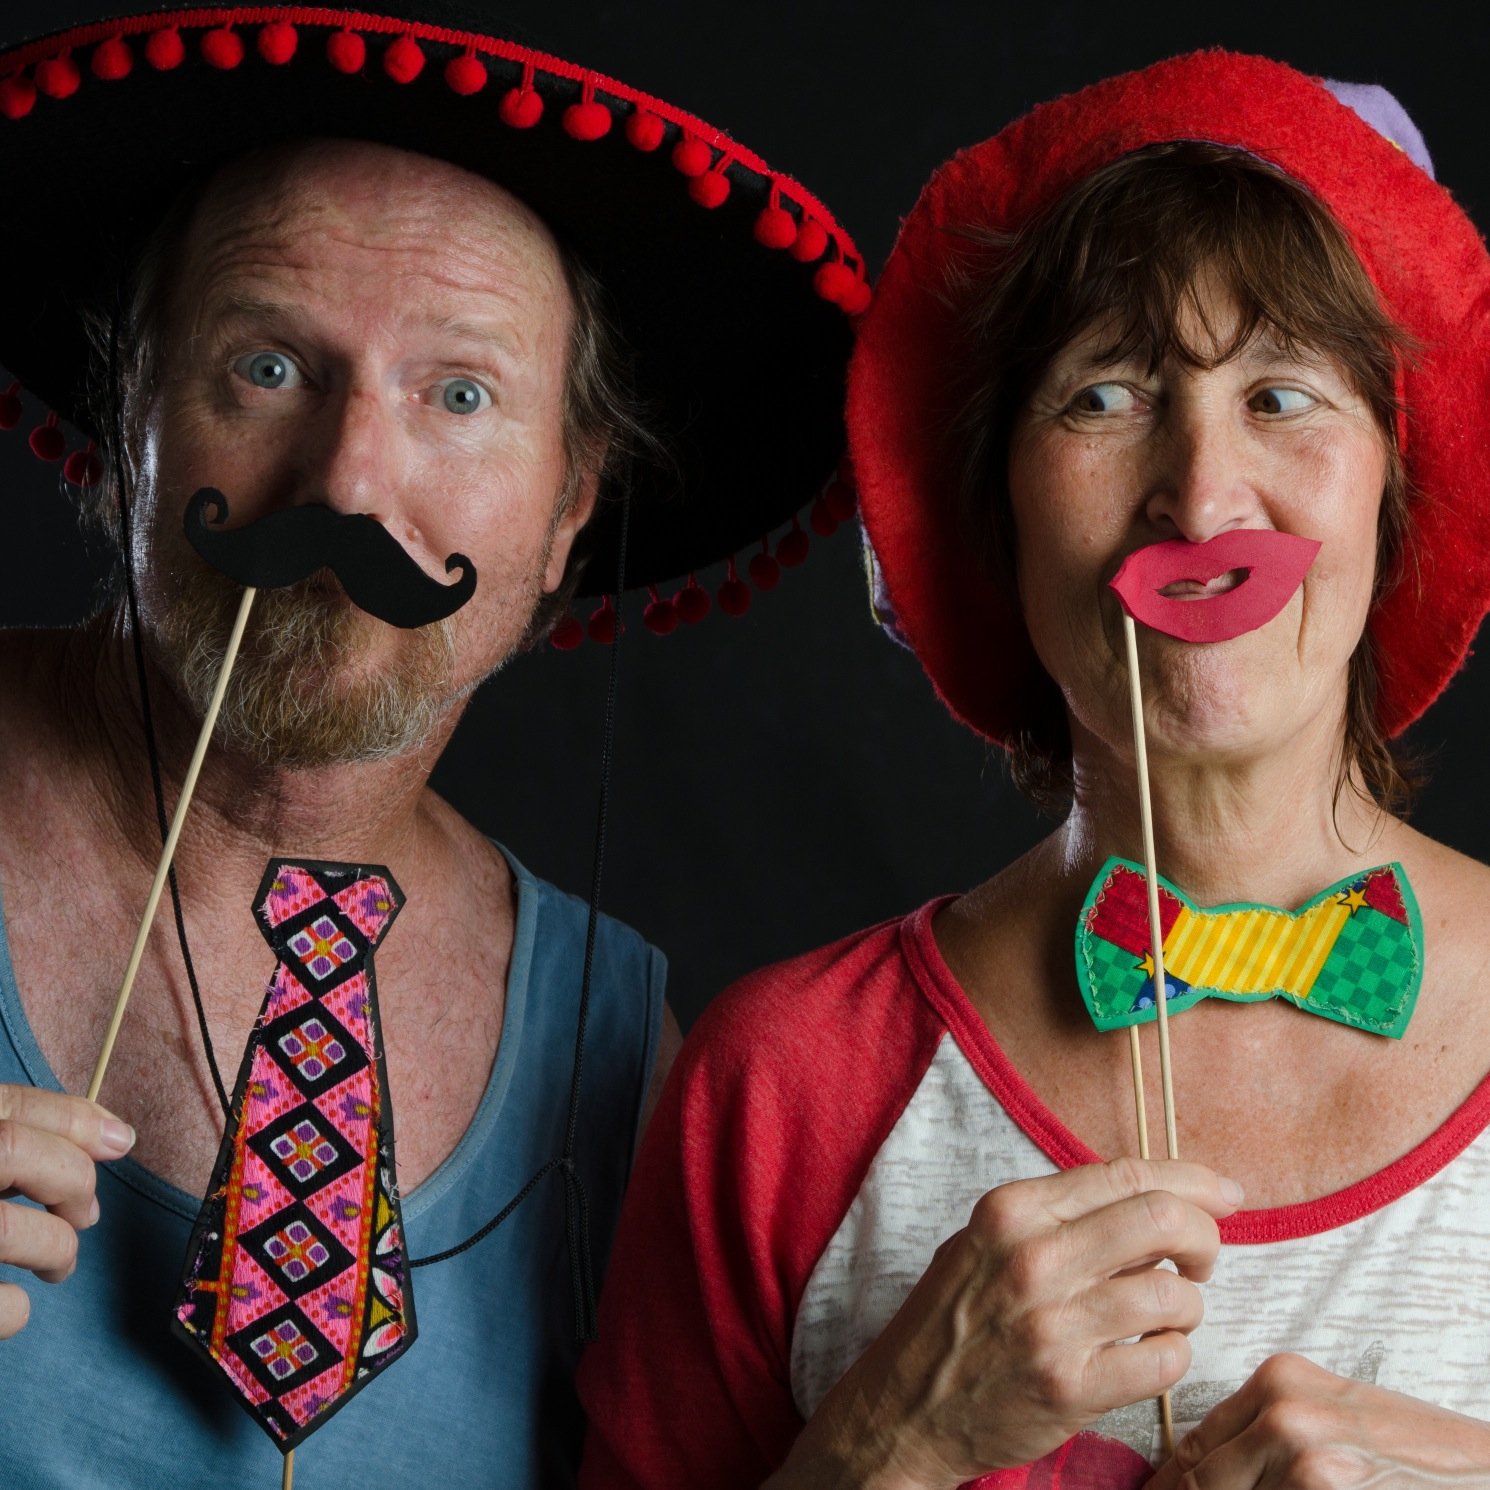 One of the first photo booth vendors in San Diego.  Est. 2008.  Bringing fun and good times one photo strip at a time!